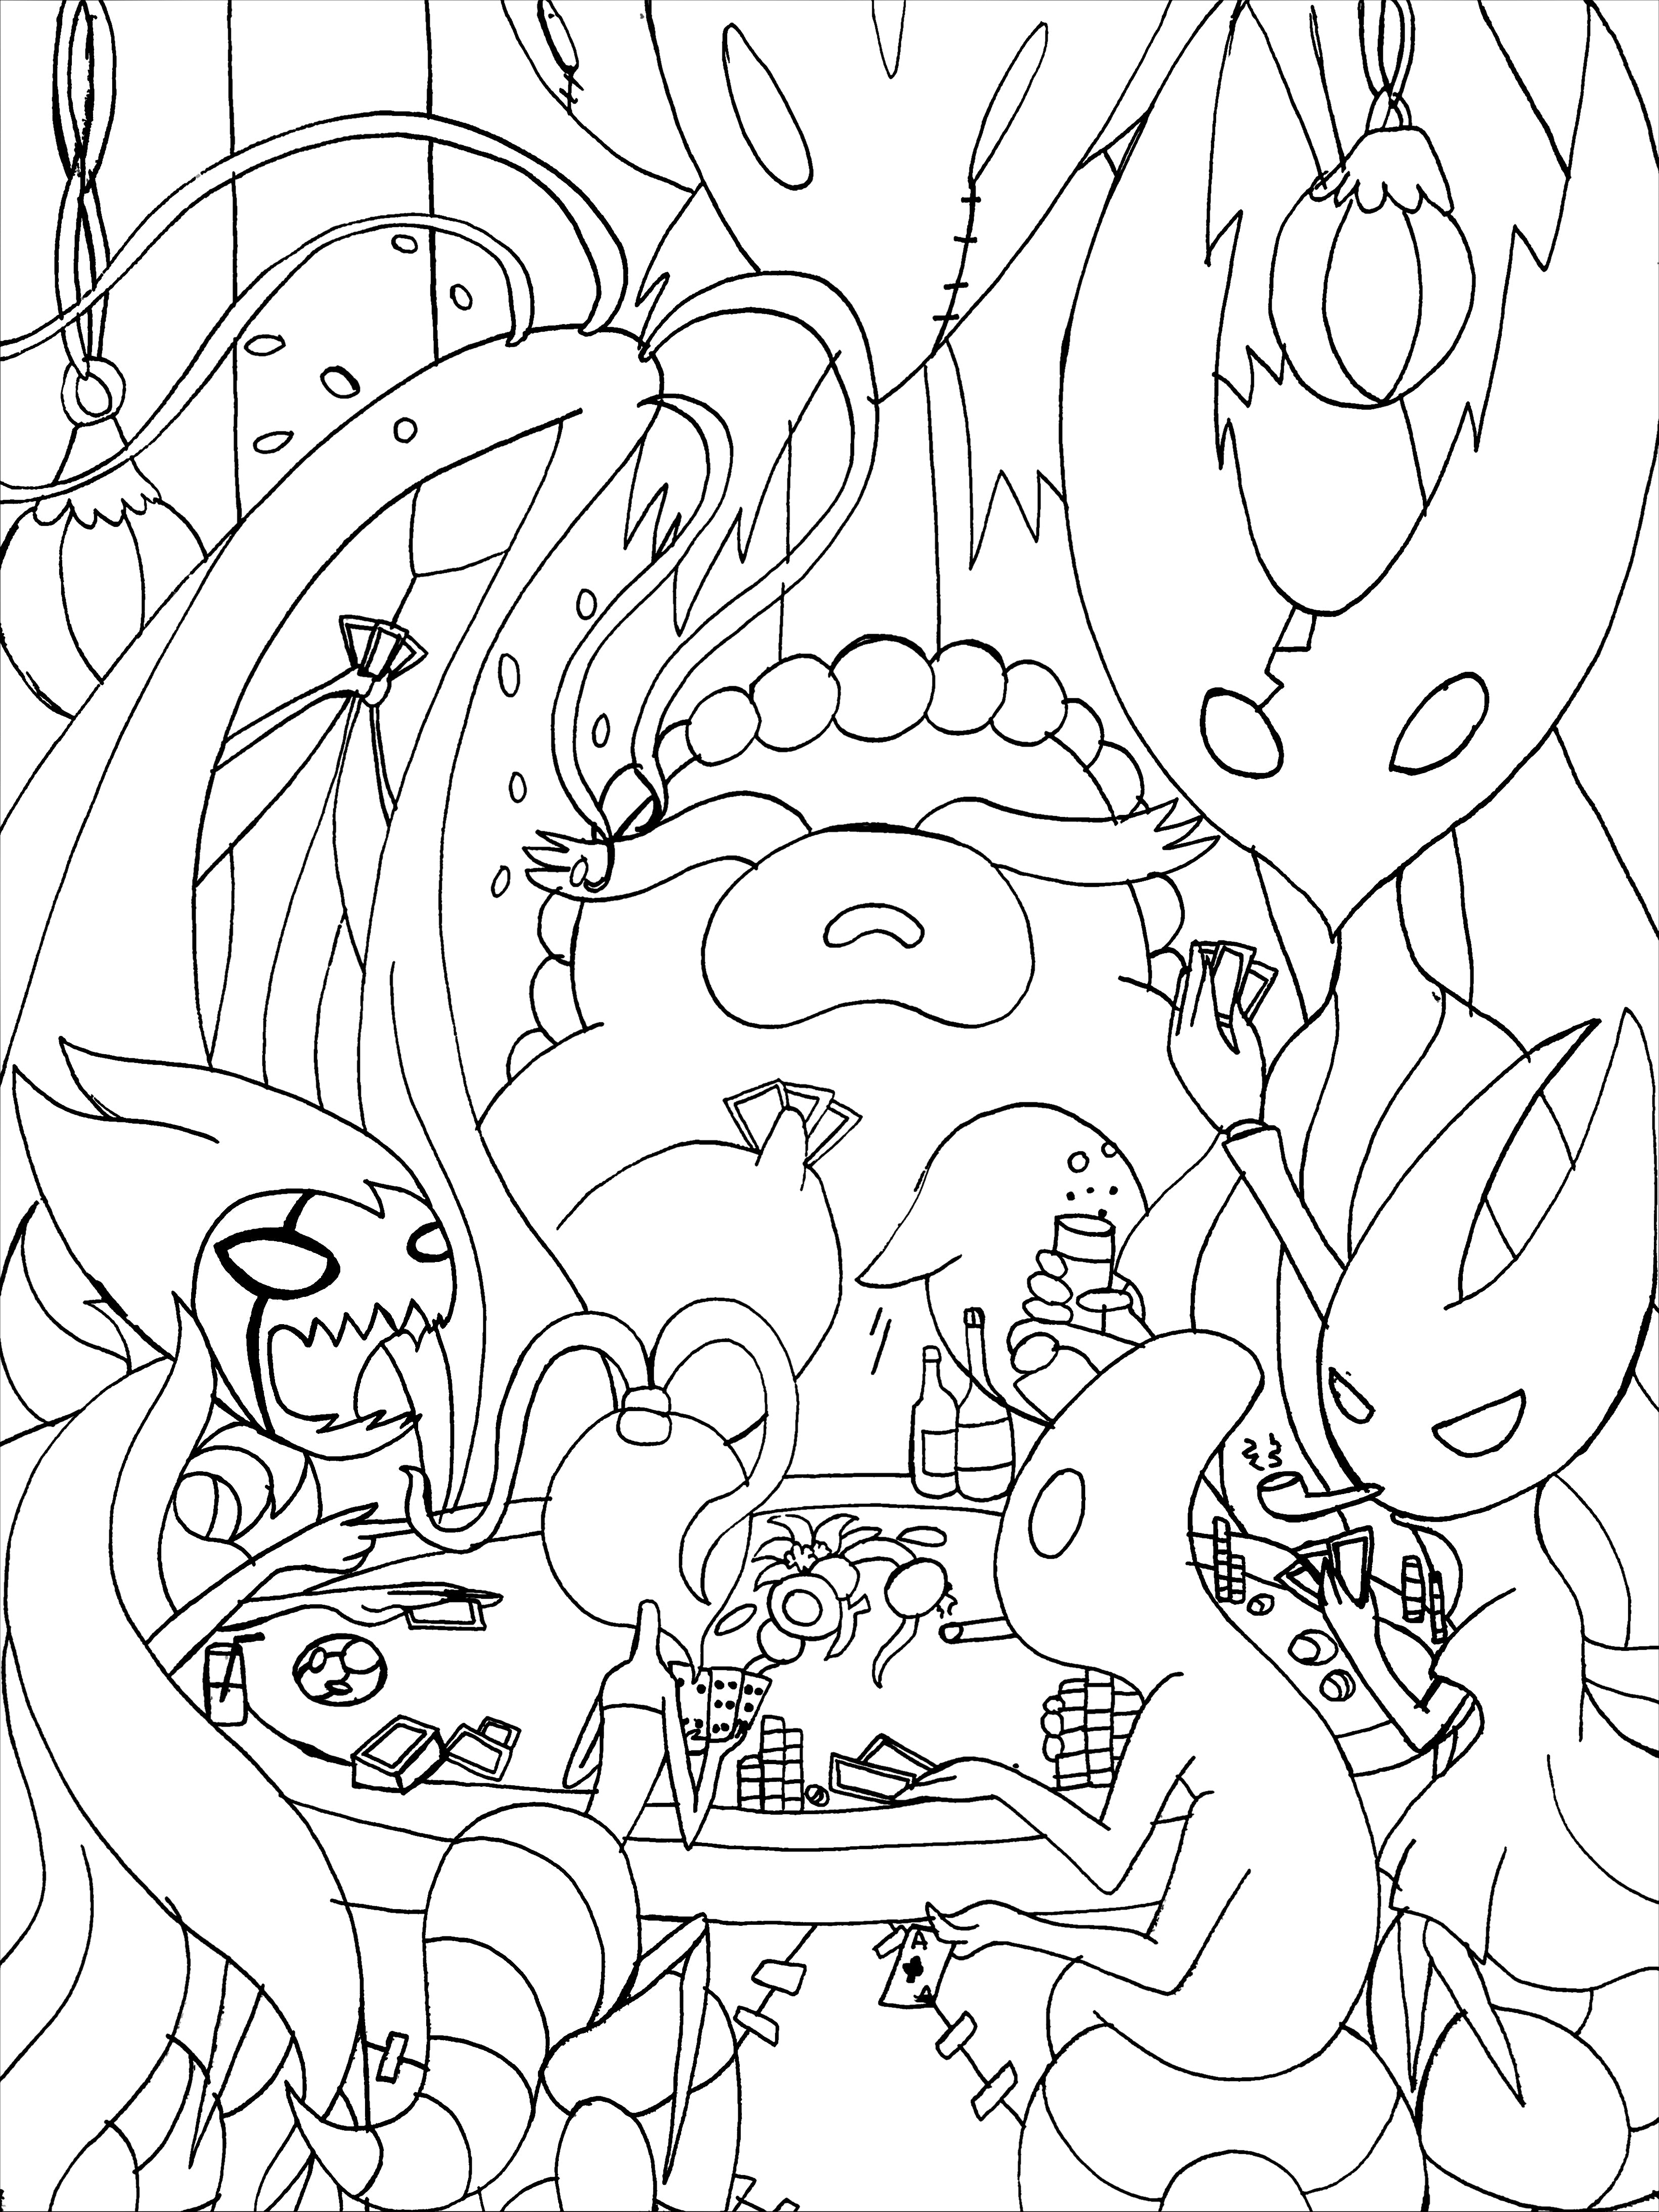 artsy sister, hollow knight lineart, hollow knight playing poker